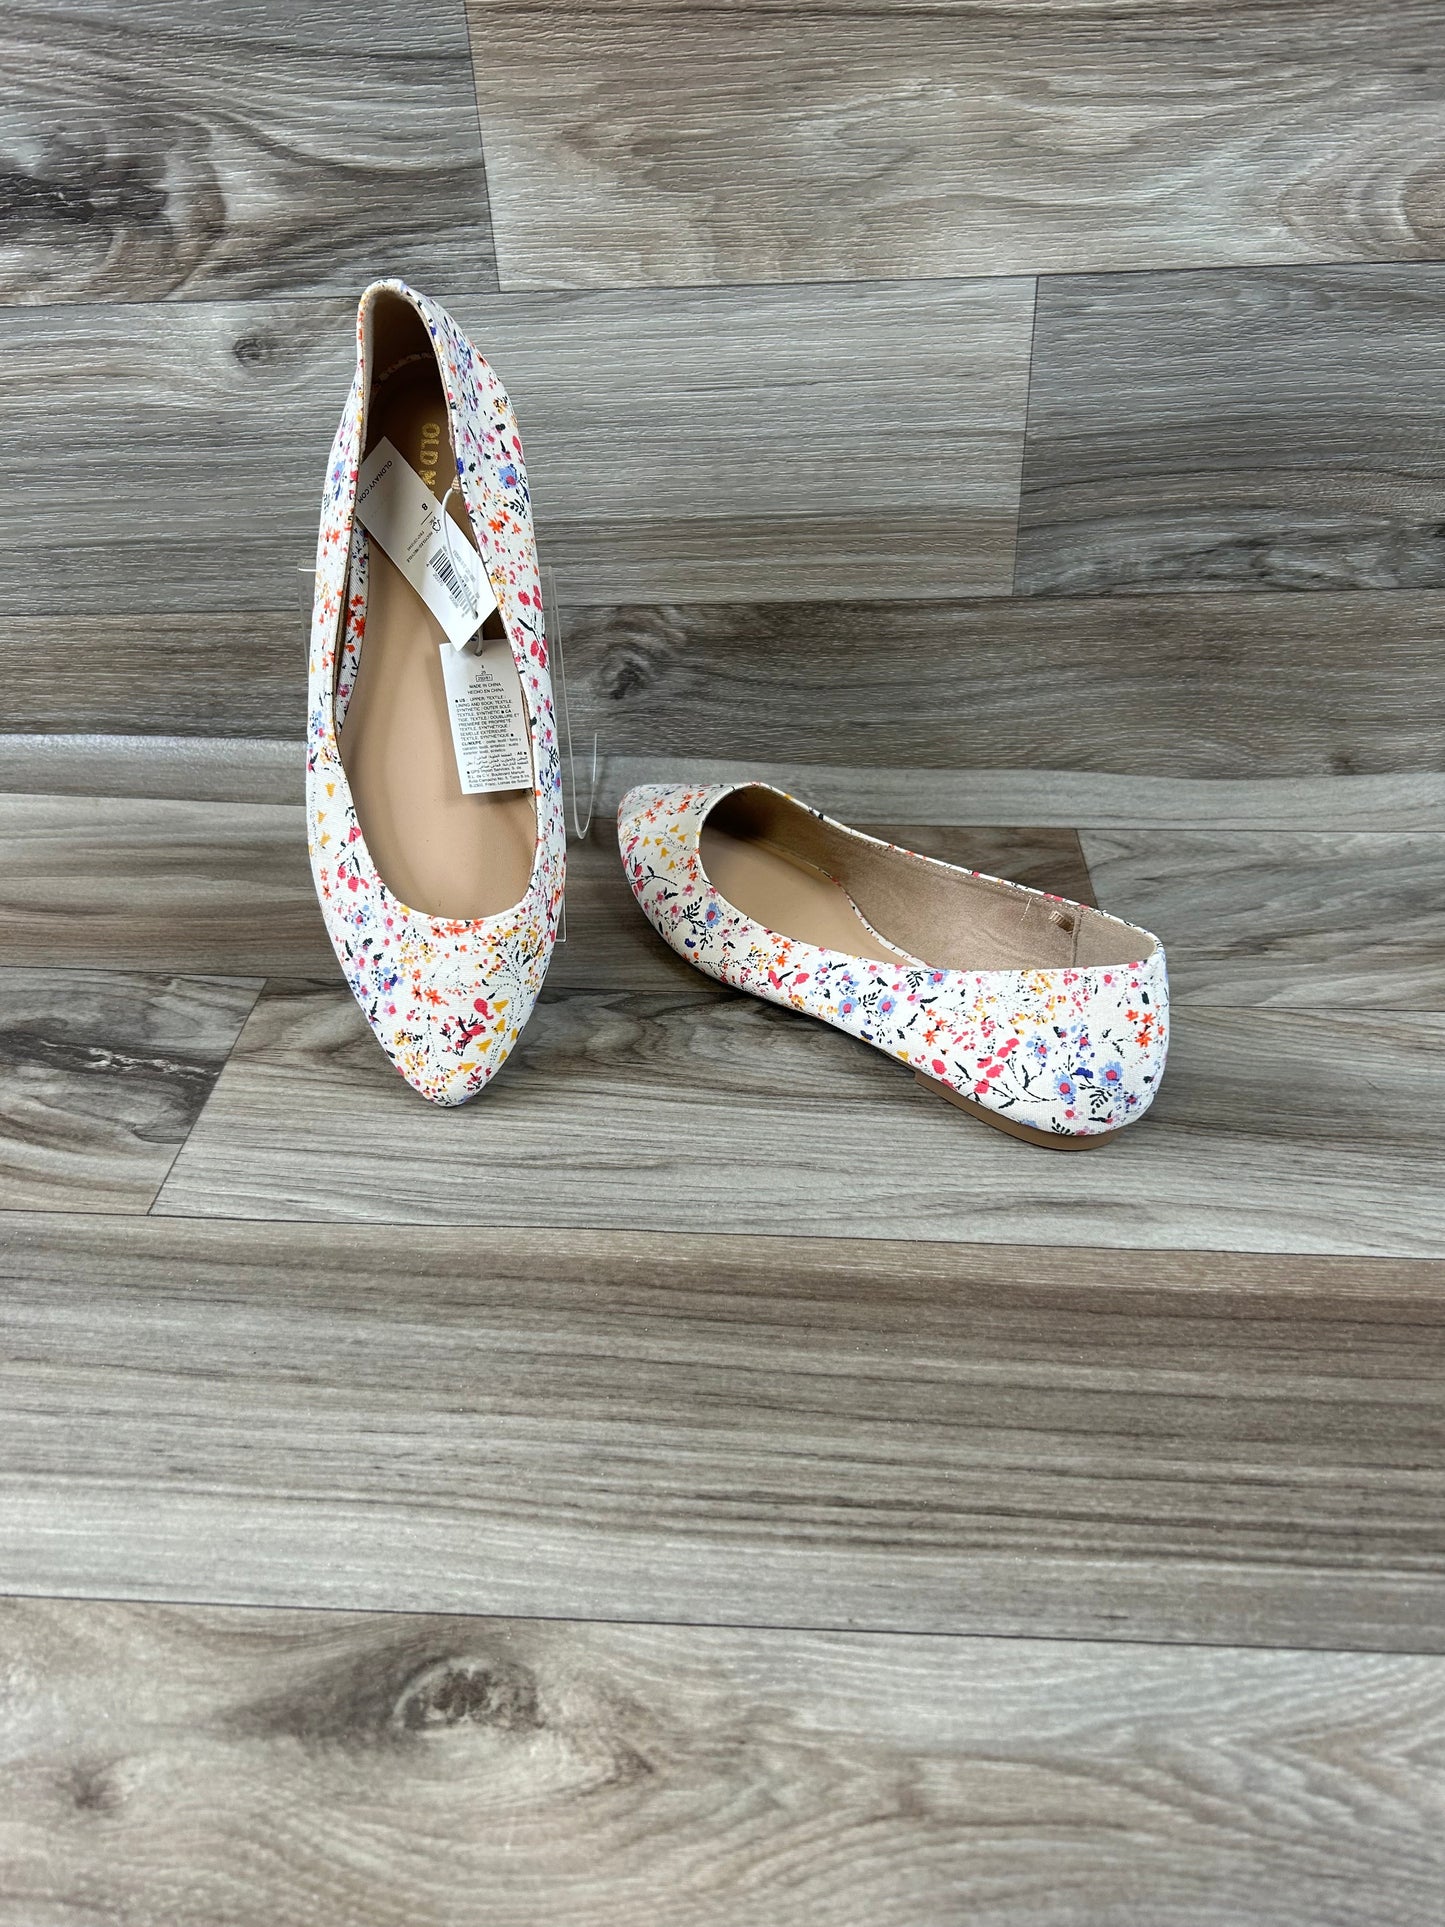 Floral Print Shoes Flats Old Navy, Size 8